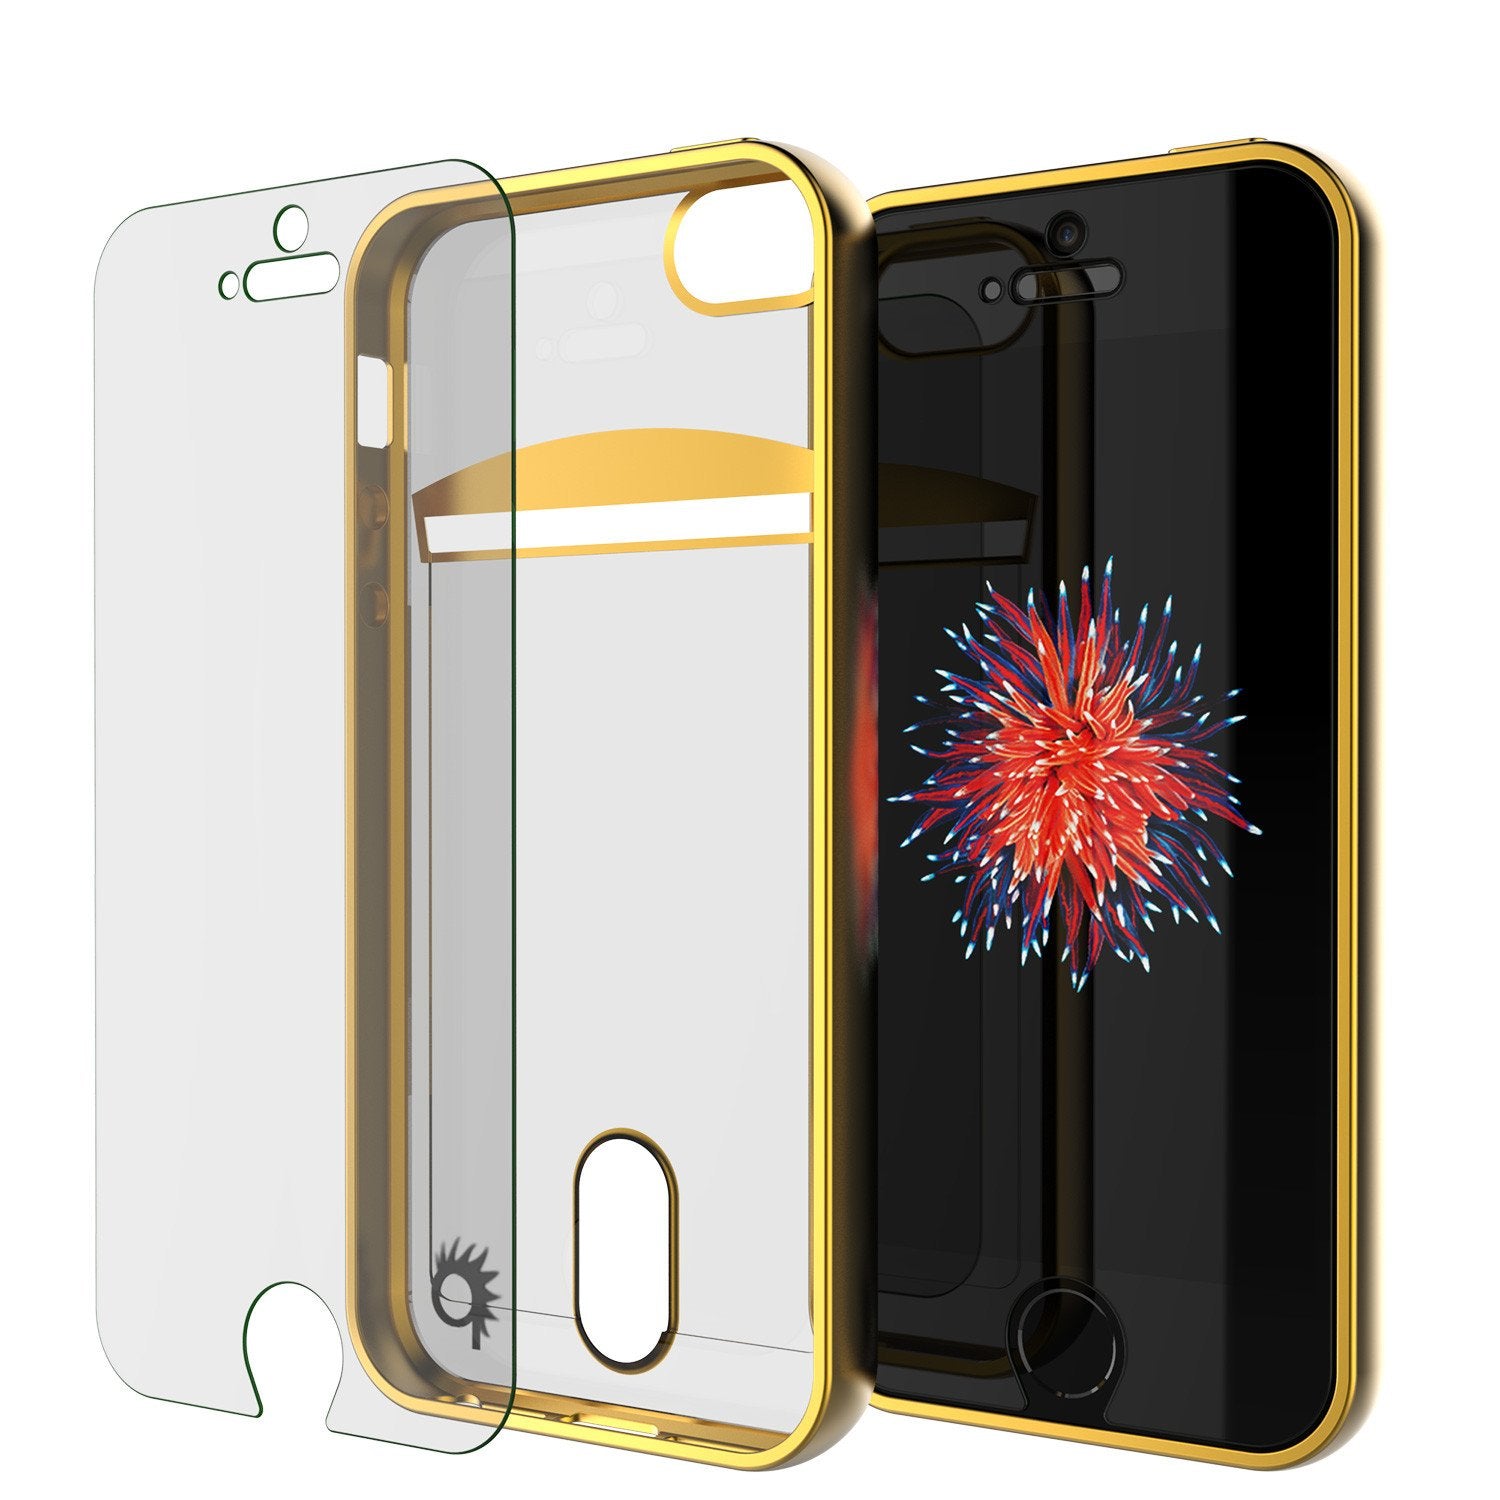 iPhone SE/5S/5 Case, PUNKCASE® LUCID Gold Series | Card Slot | SHIELD Screen Protector | Ultra fit - PunkCase NZ